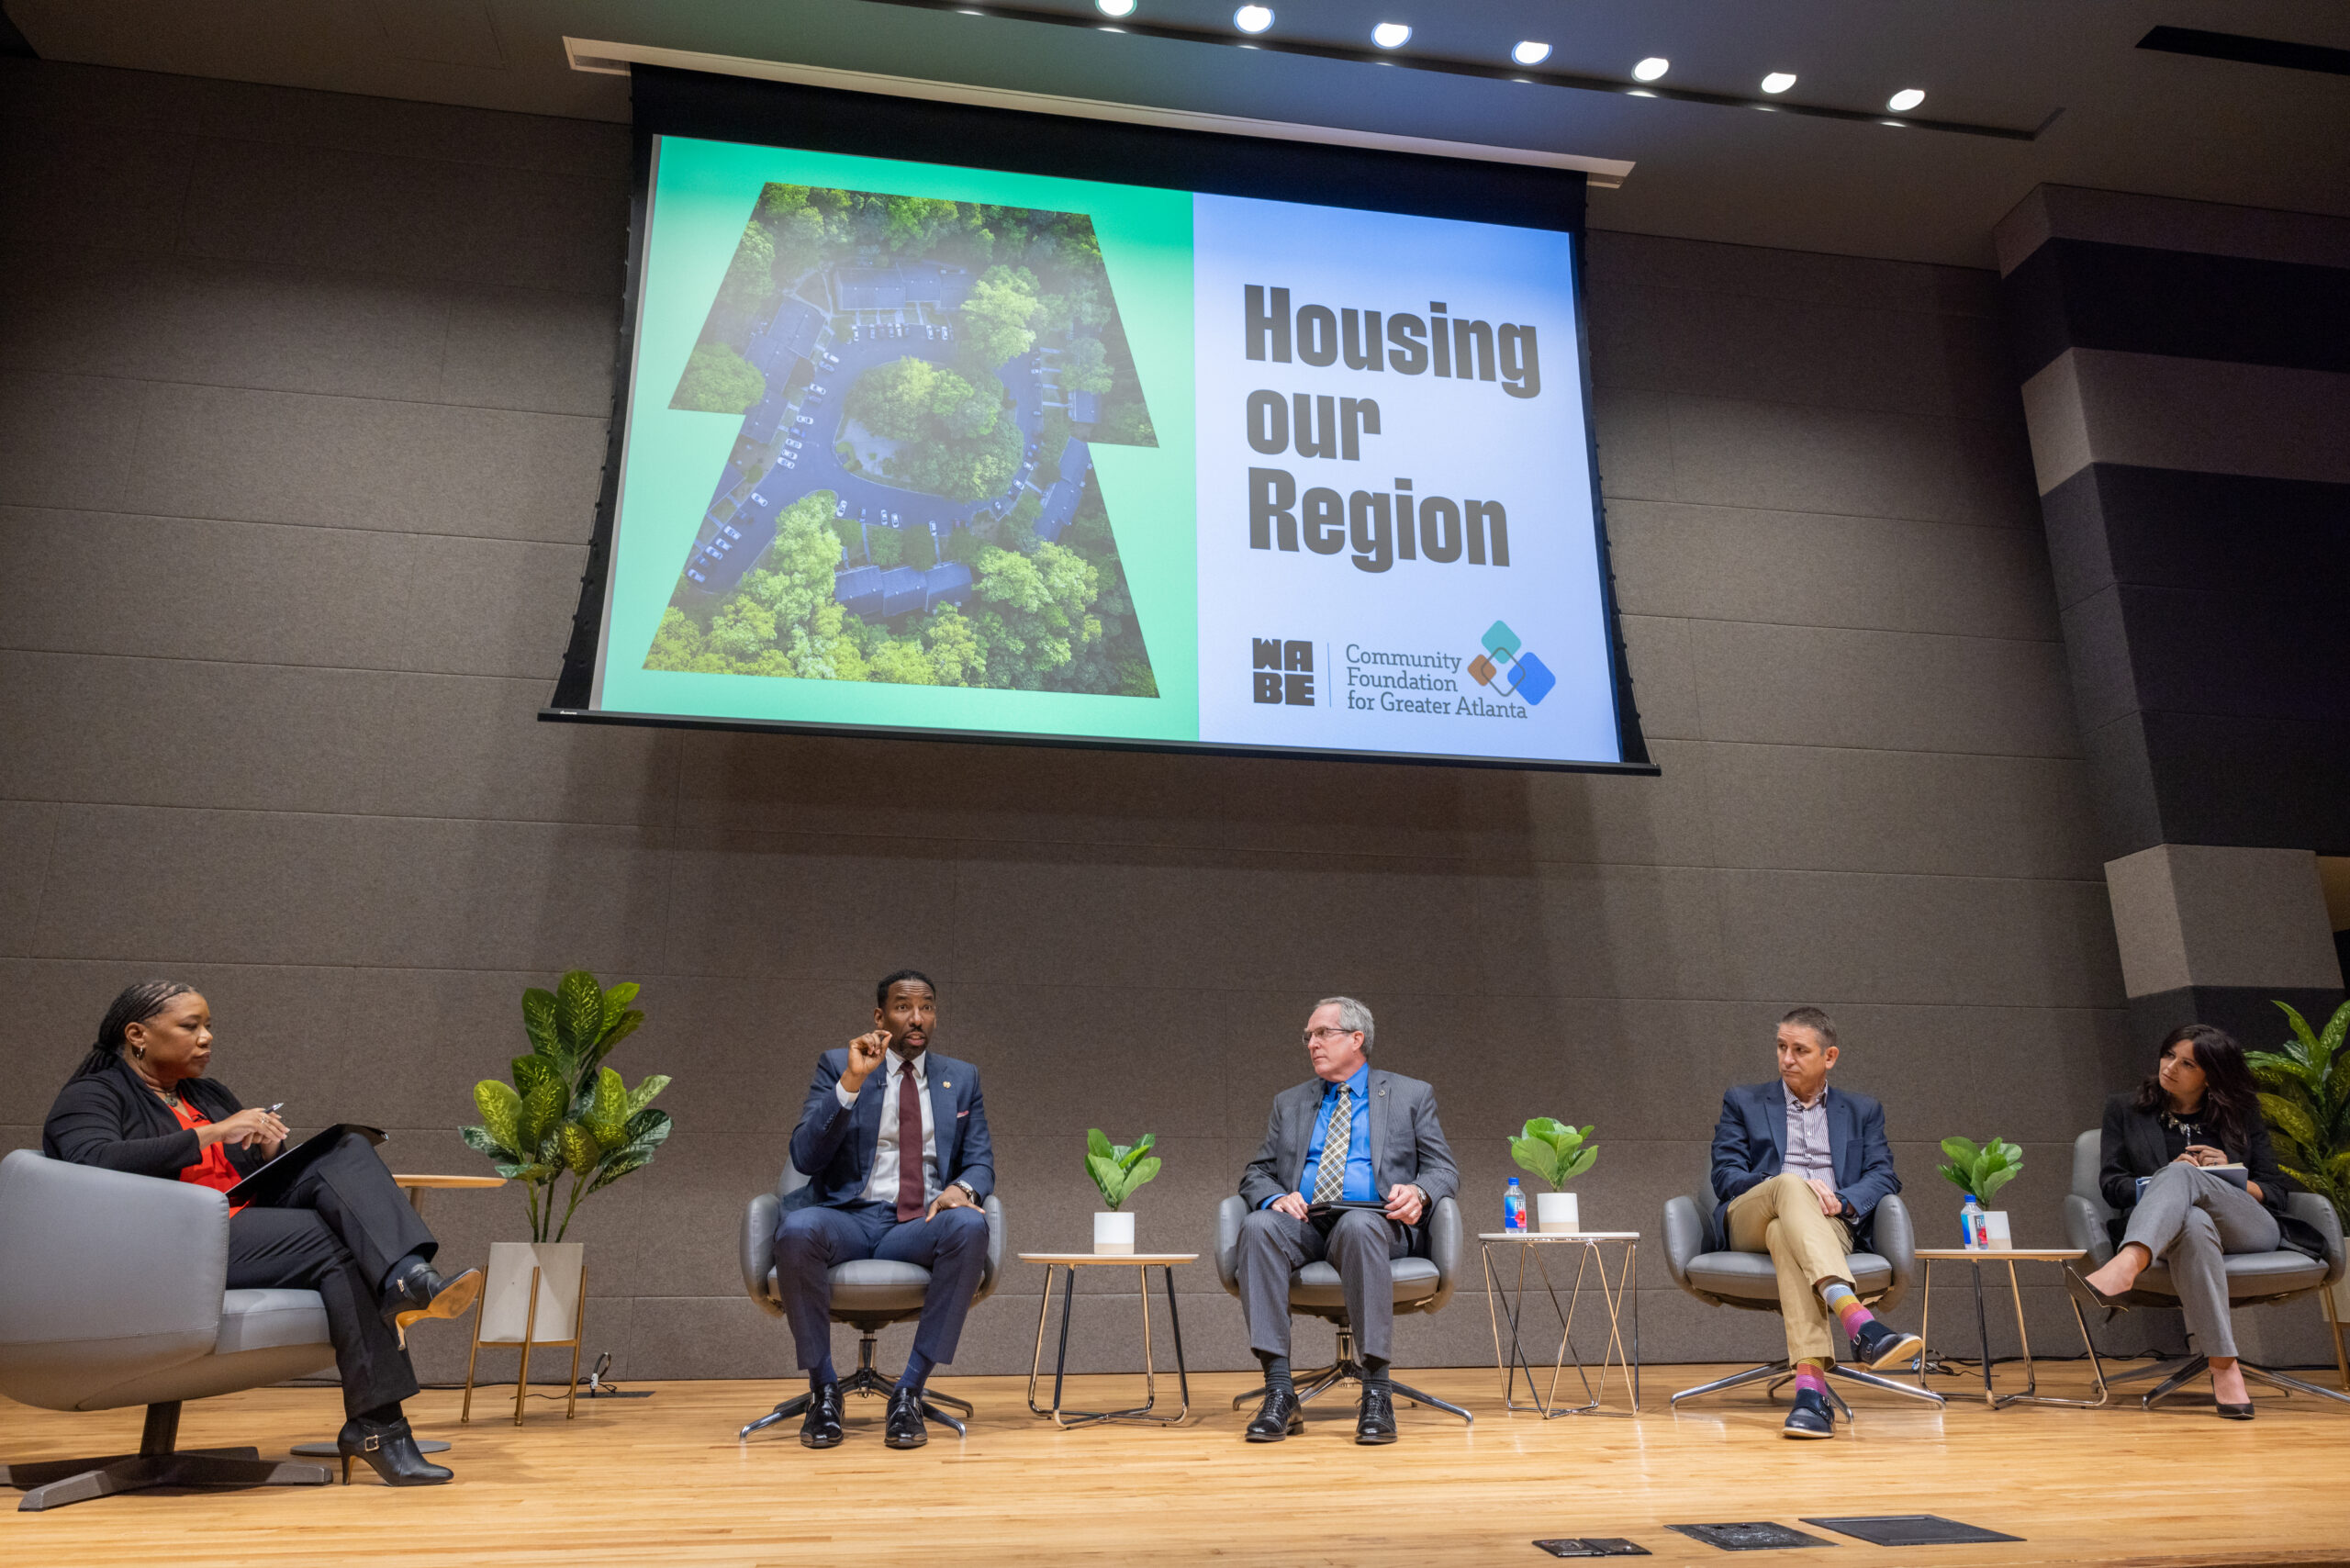 Featured image for “Organizations working to respond to the affordable housing crisis”